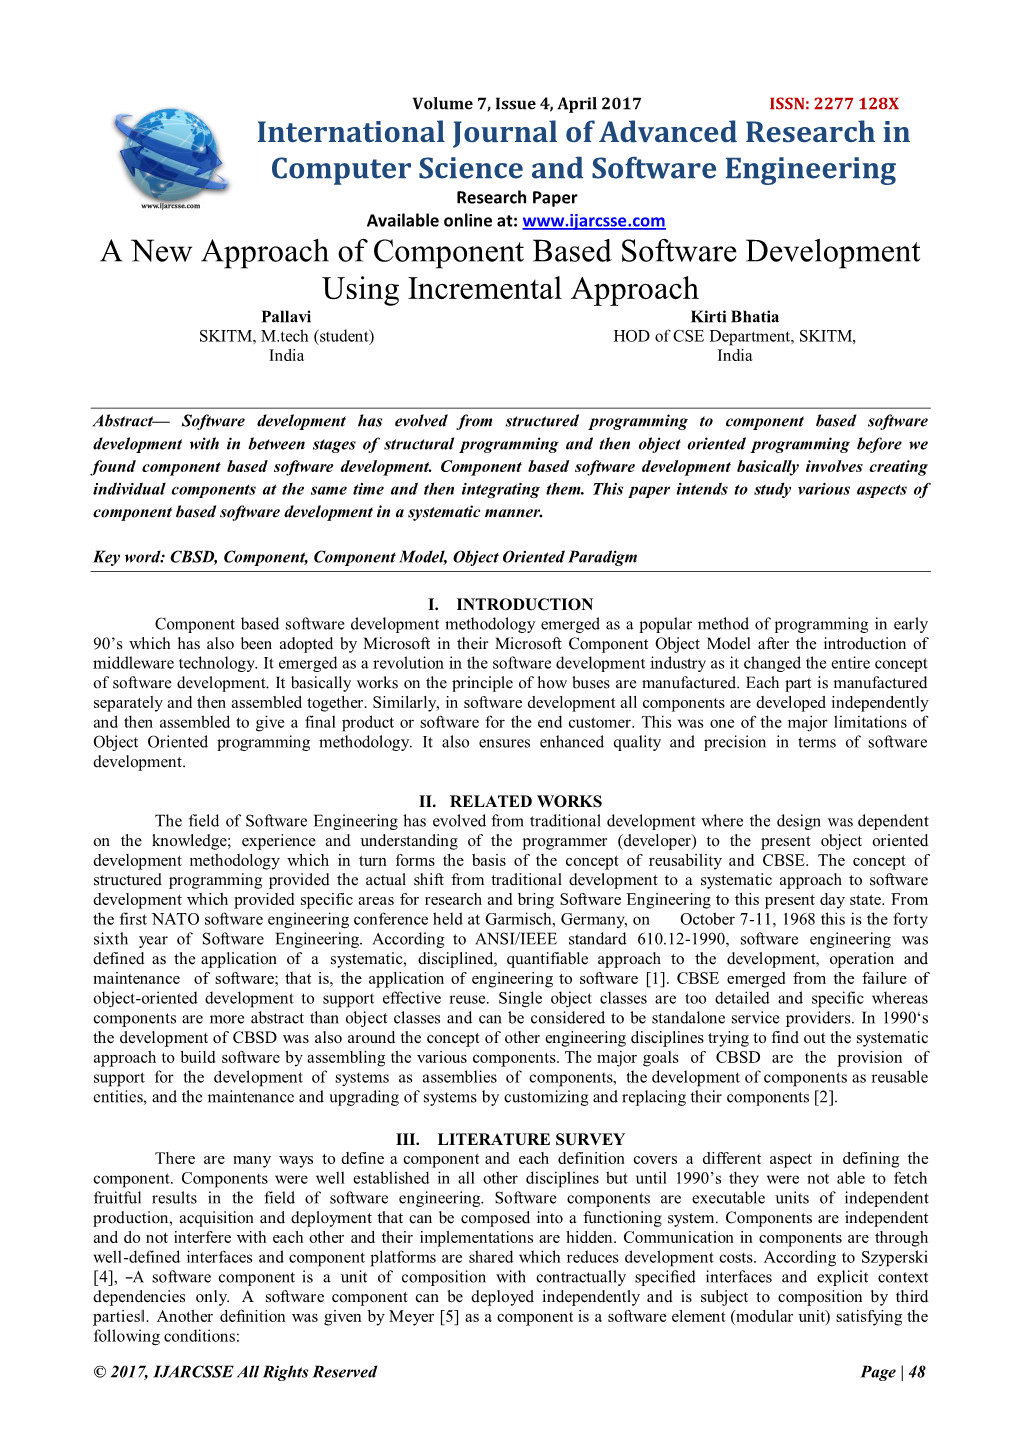 A New Approach of Component Based Software Development